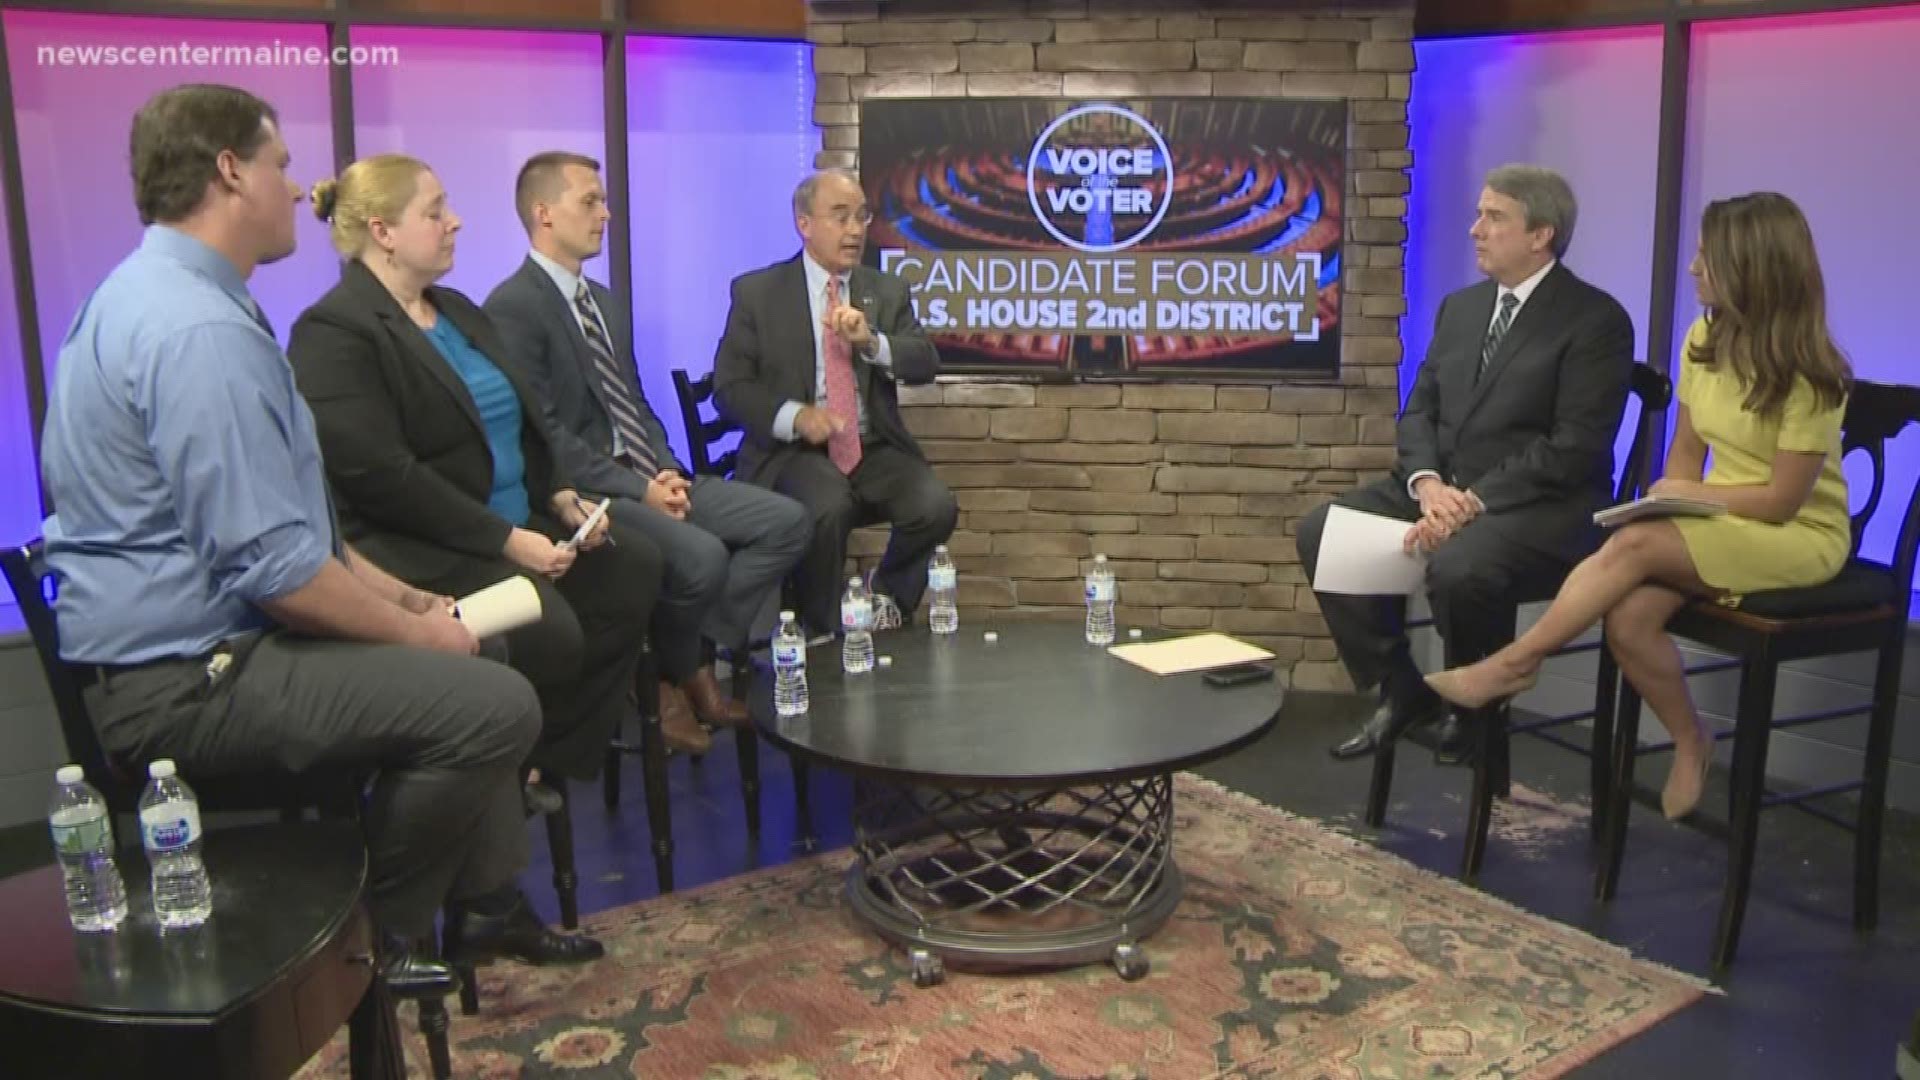 CD2 candidates square off in Voice of the Voter forum